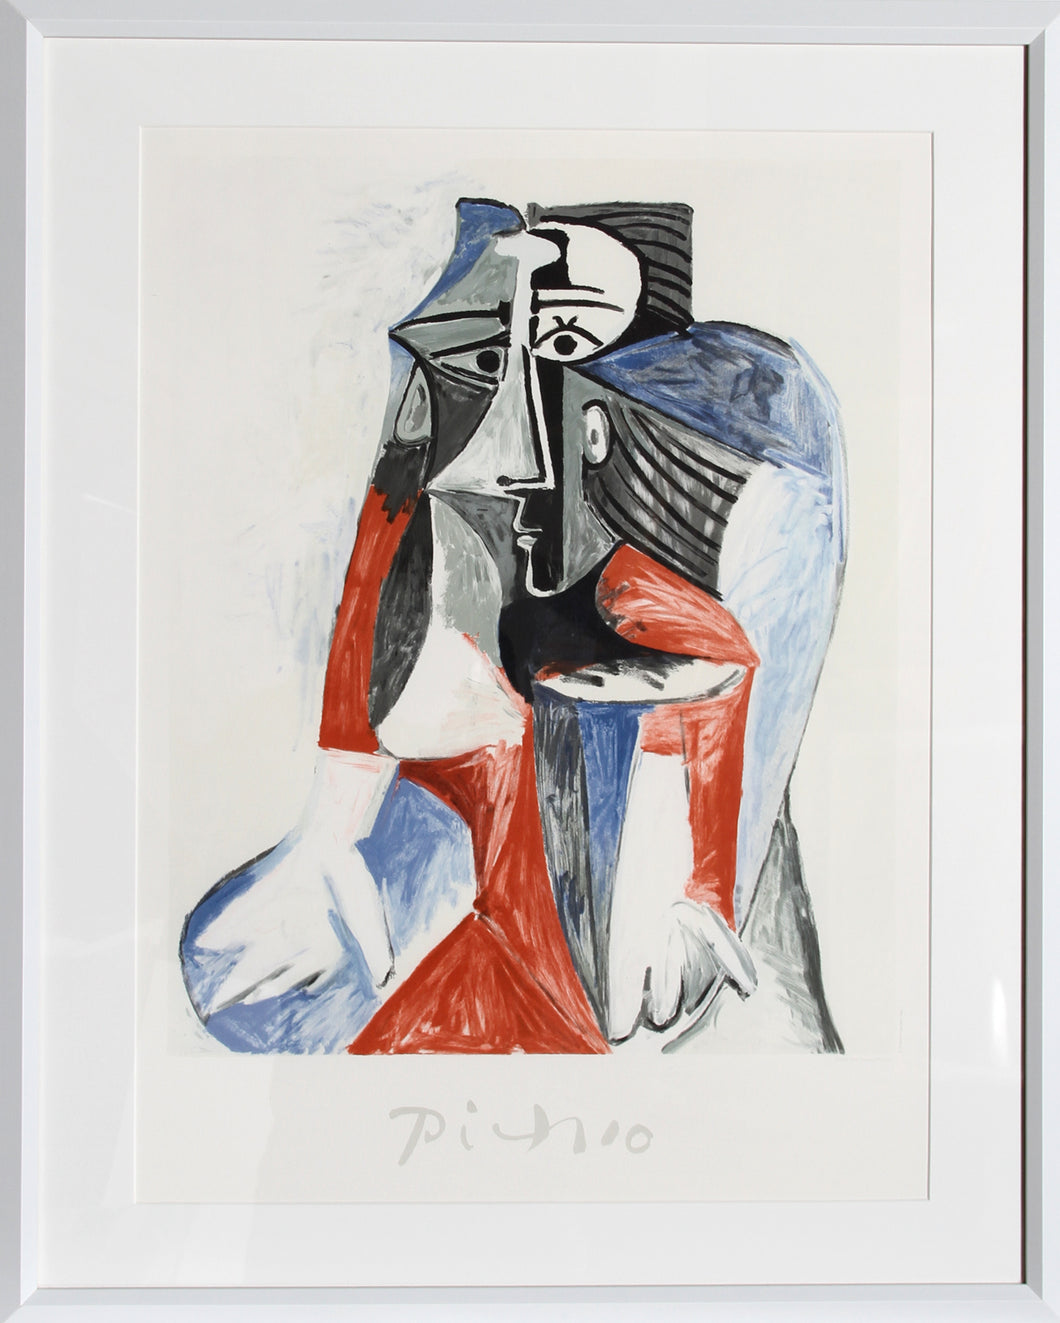 Pablo Picasso, Femme Assise, 28-1-k, Lithograph